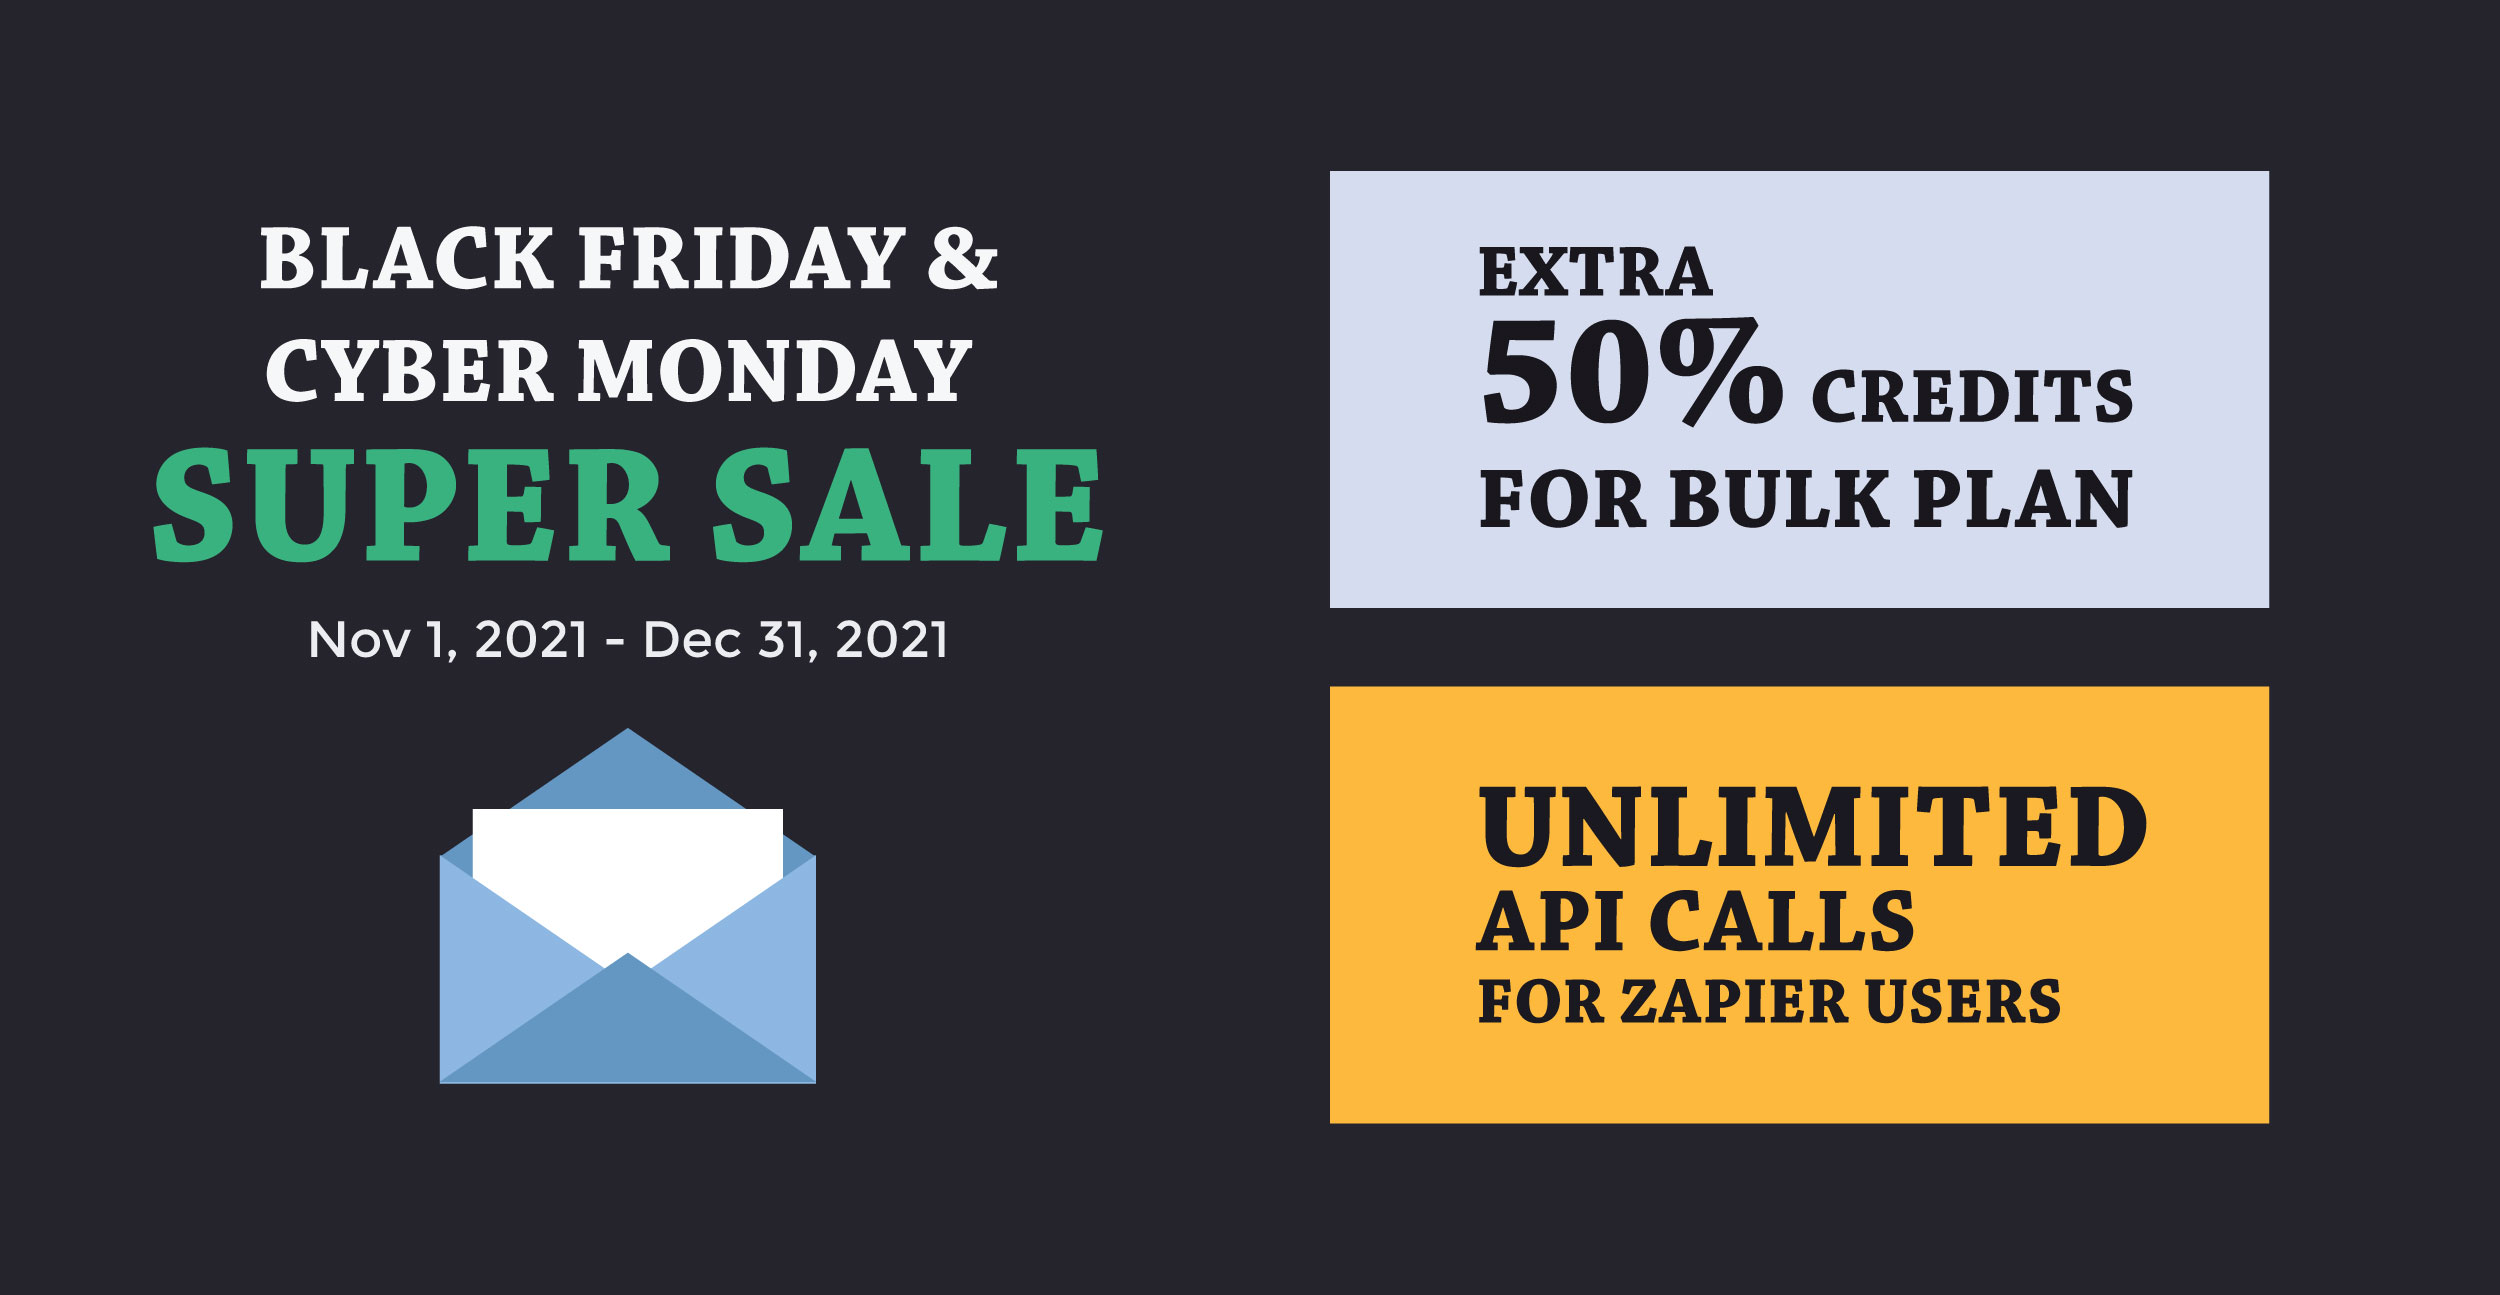 Promotion for Black Friday & Cyber Monday 2021